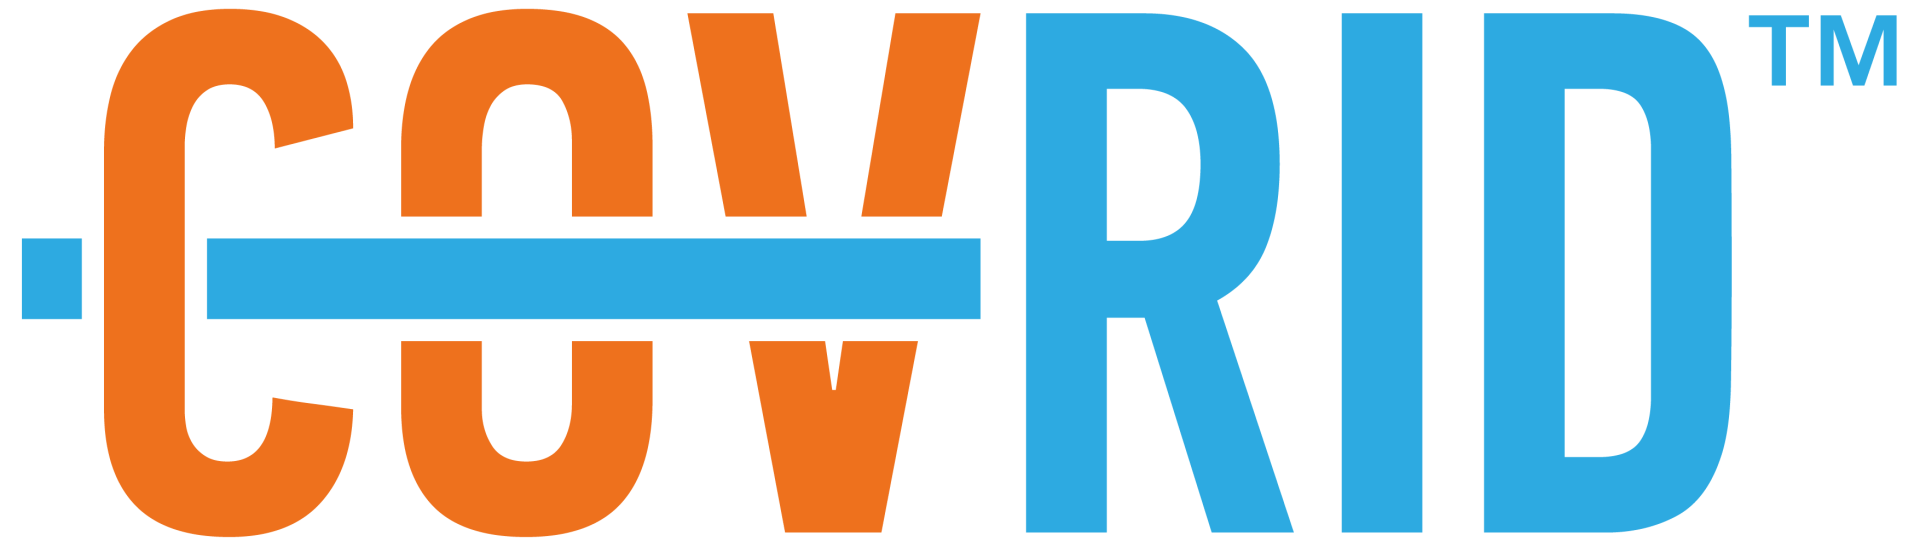 Orange and Blue COV-RID logo for Multi Purpose Surface cleanser